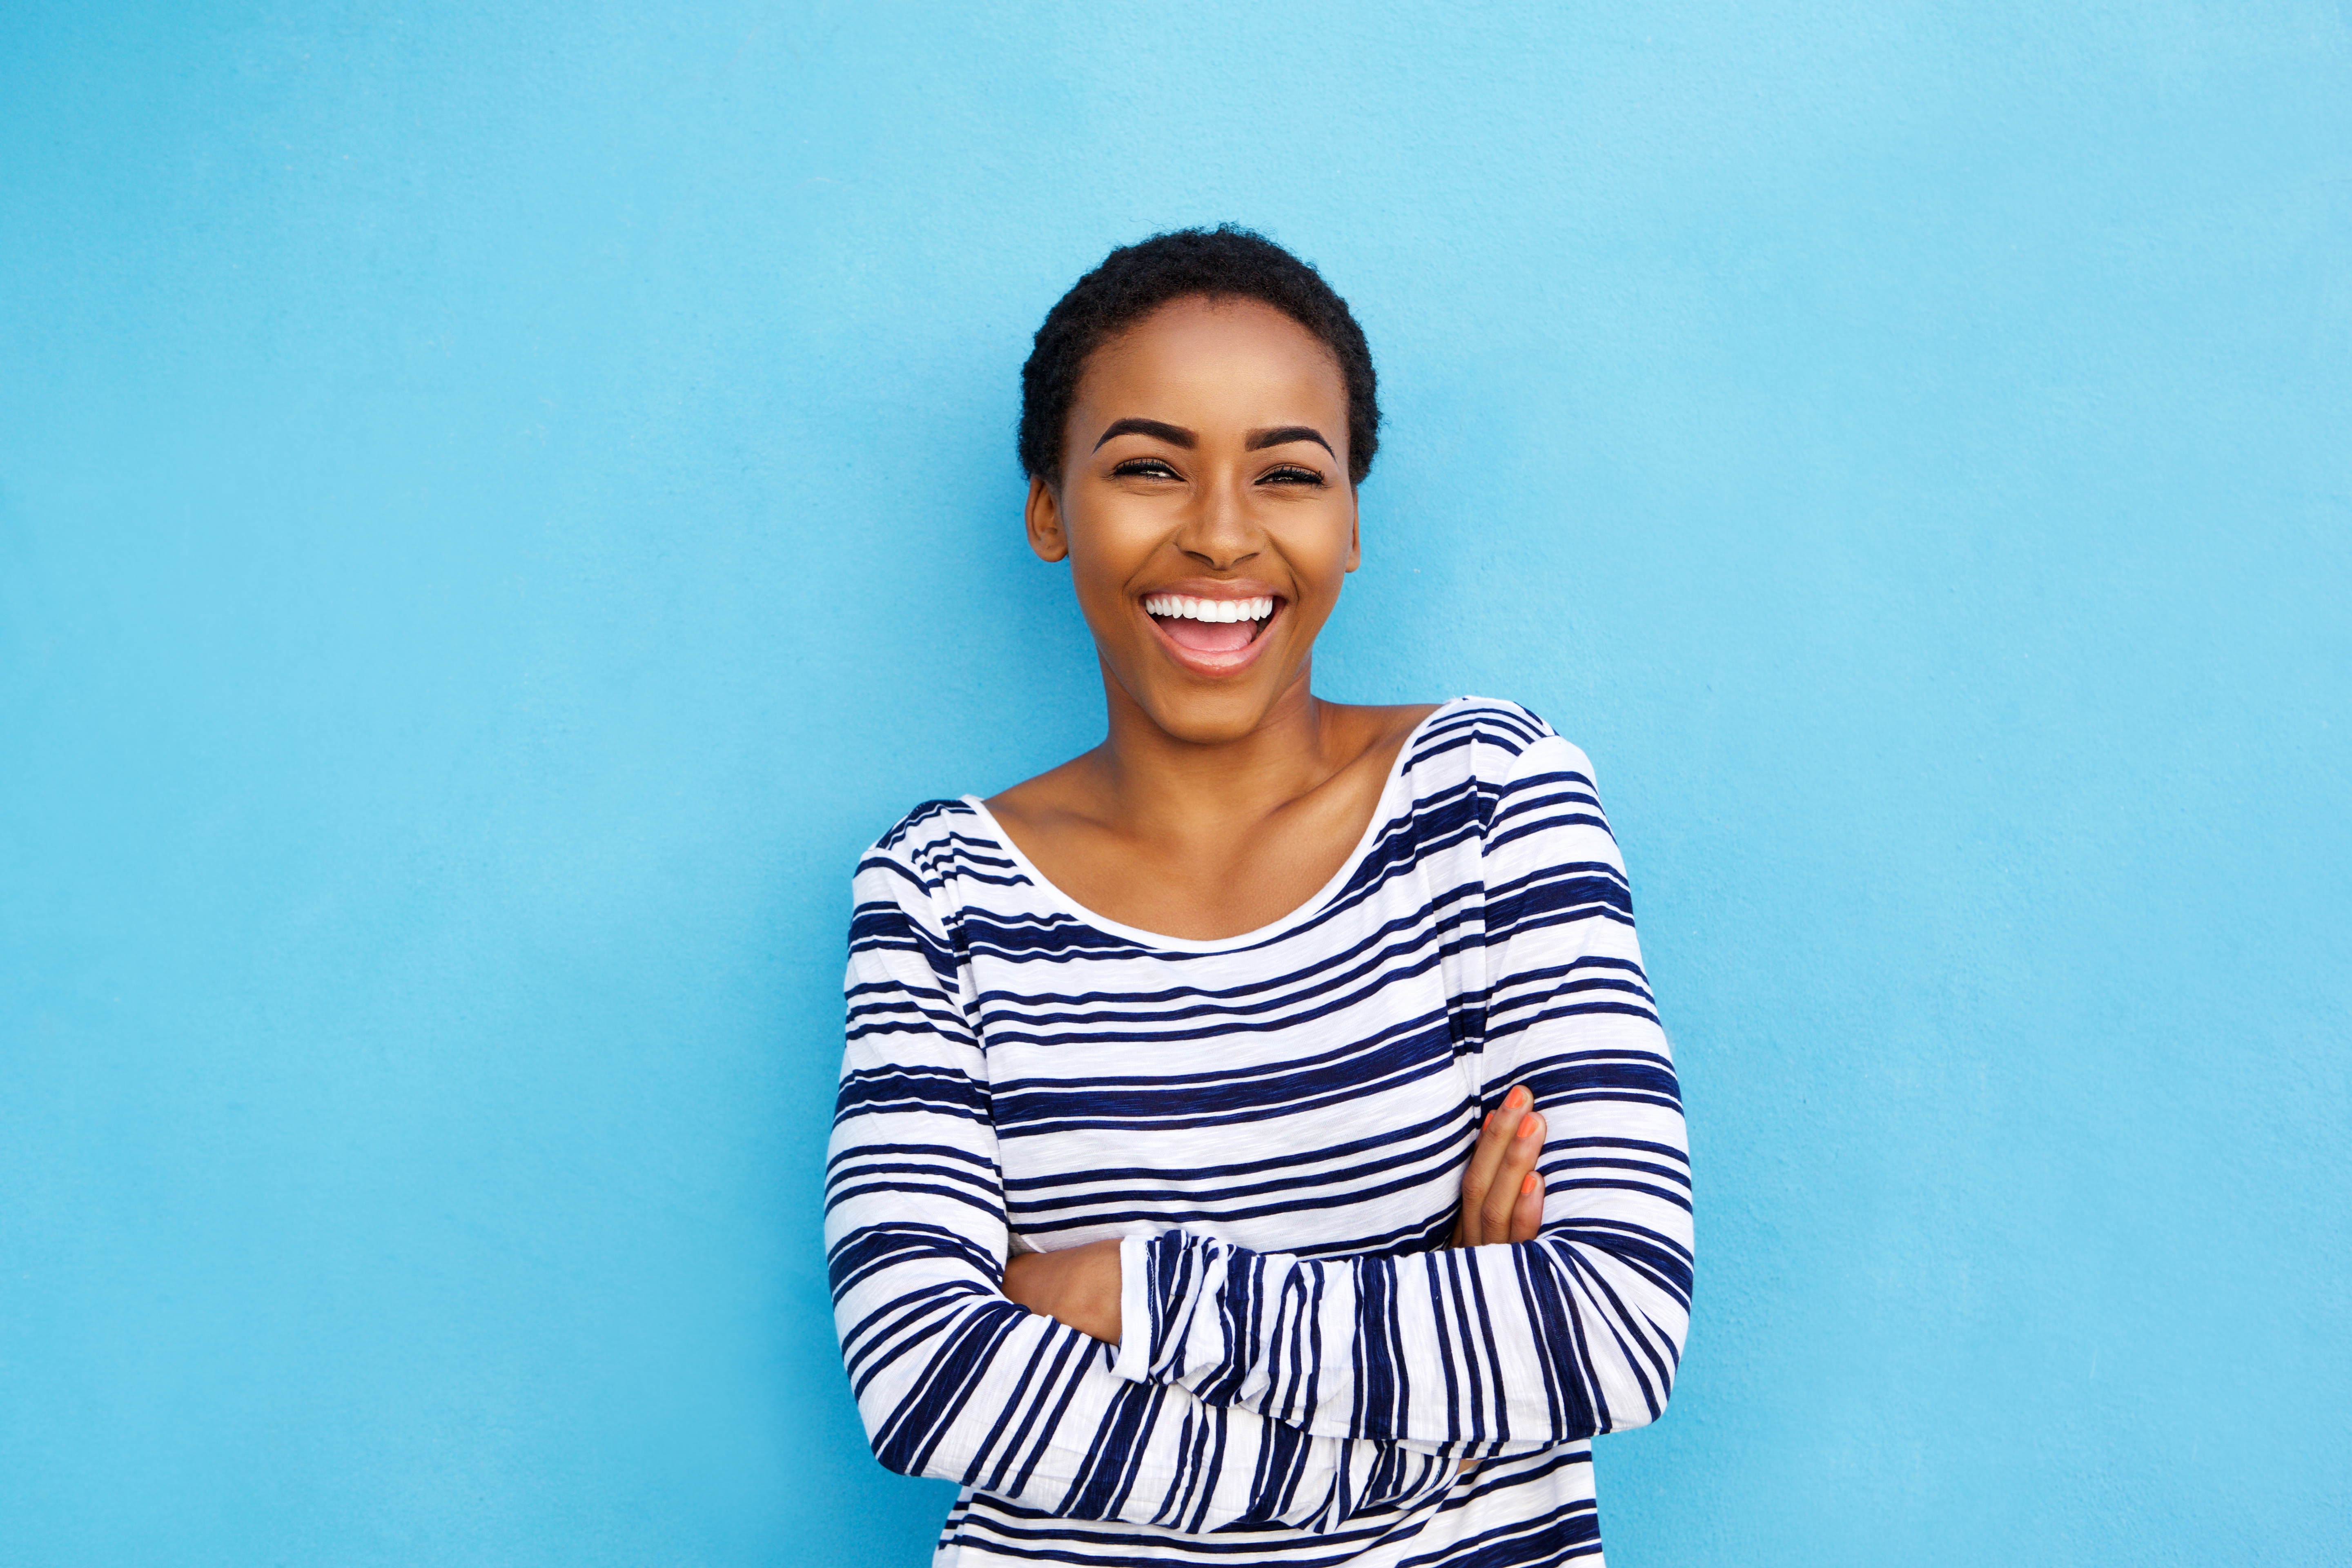 Black woman smiling on blue background